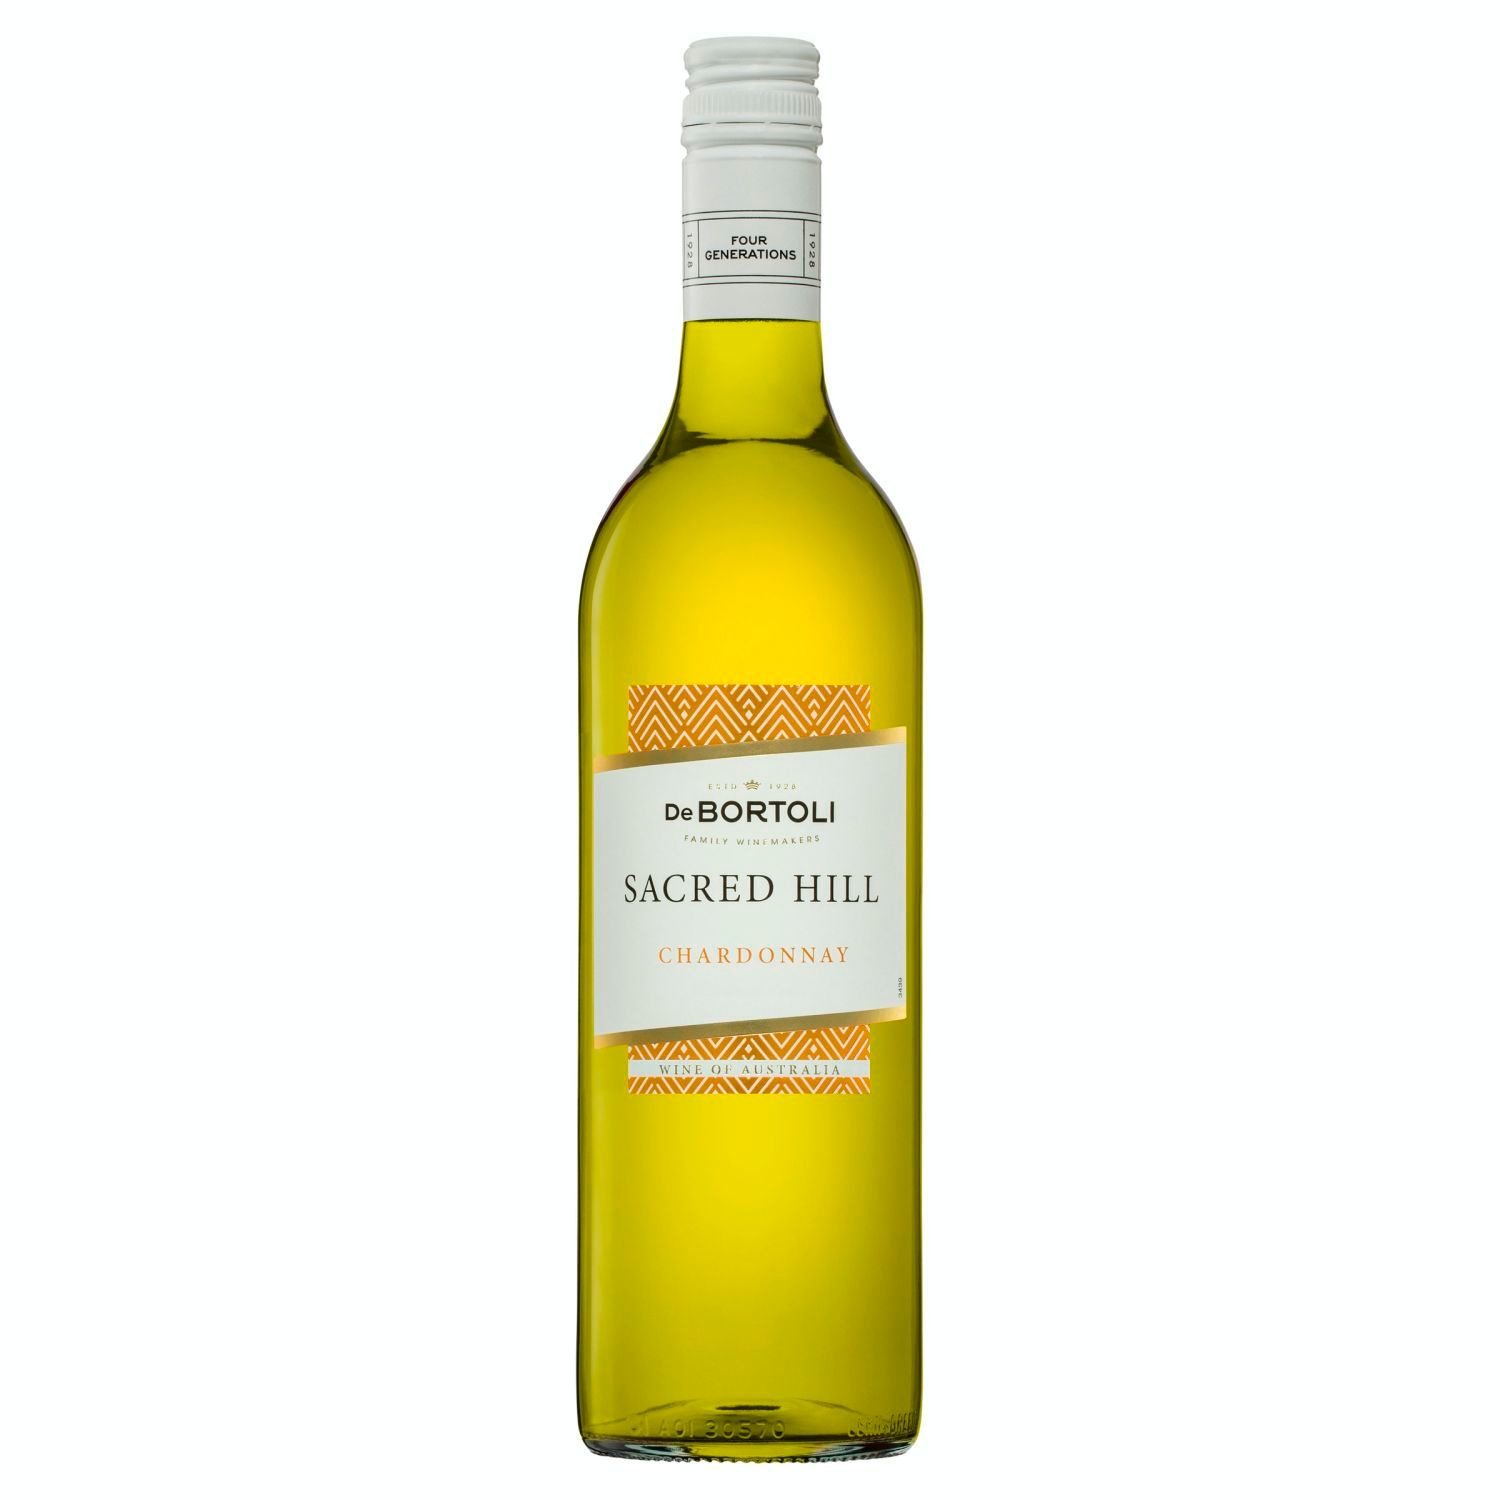 This Chardonnay from the Riverina packs plenty of punch for a great price. Peaches, apples, melon and a lick of fleshy textural charm makes for a great Chardonnay.<br /> <br />Alcohol Volume: 12.00%<br /><br />Pack Format: Bottle<br /><br />Standard Drinks: 7.1</br /><br />Pack Type: Bottle<br /><br />Country of Origin: Australia<br /><br />Region: Riverina<br /><br />Vintage: '2018<br />